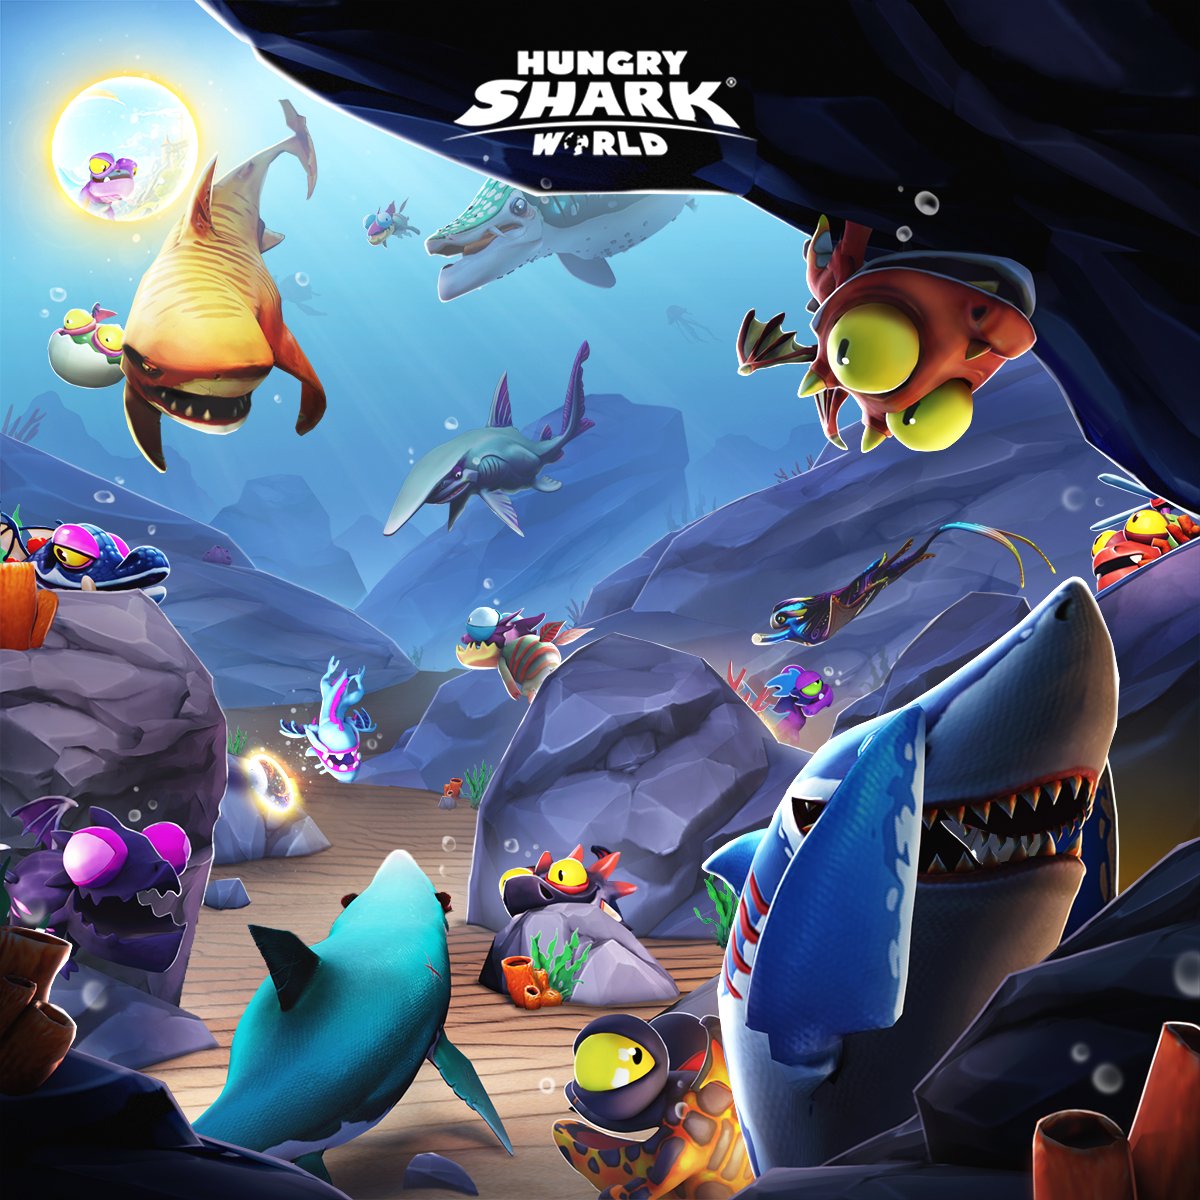 Can you find all our new baby dragons in this picture?👀 They're playing hide and seek in #HungrySharkWorld! 😍 #HSW